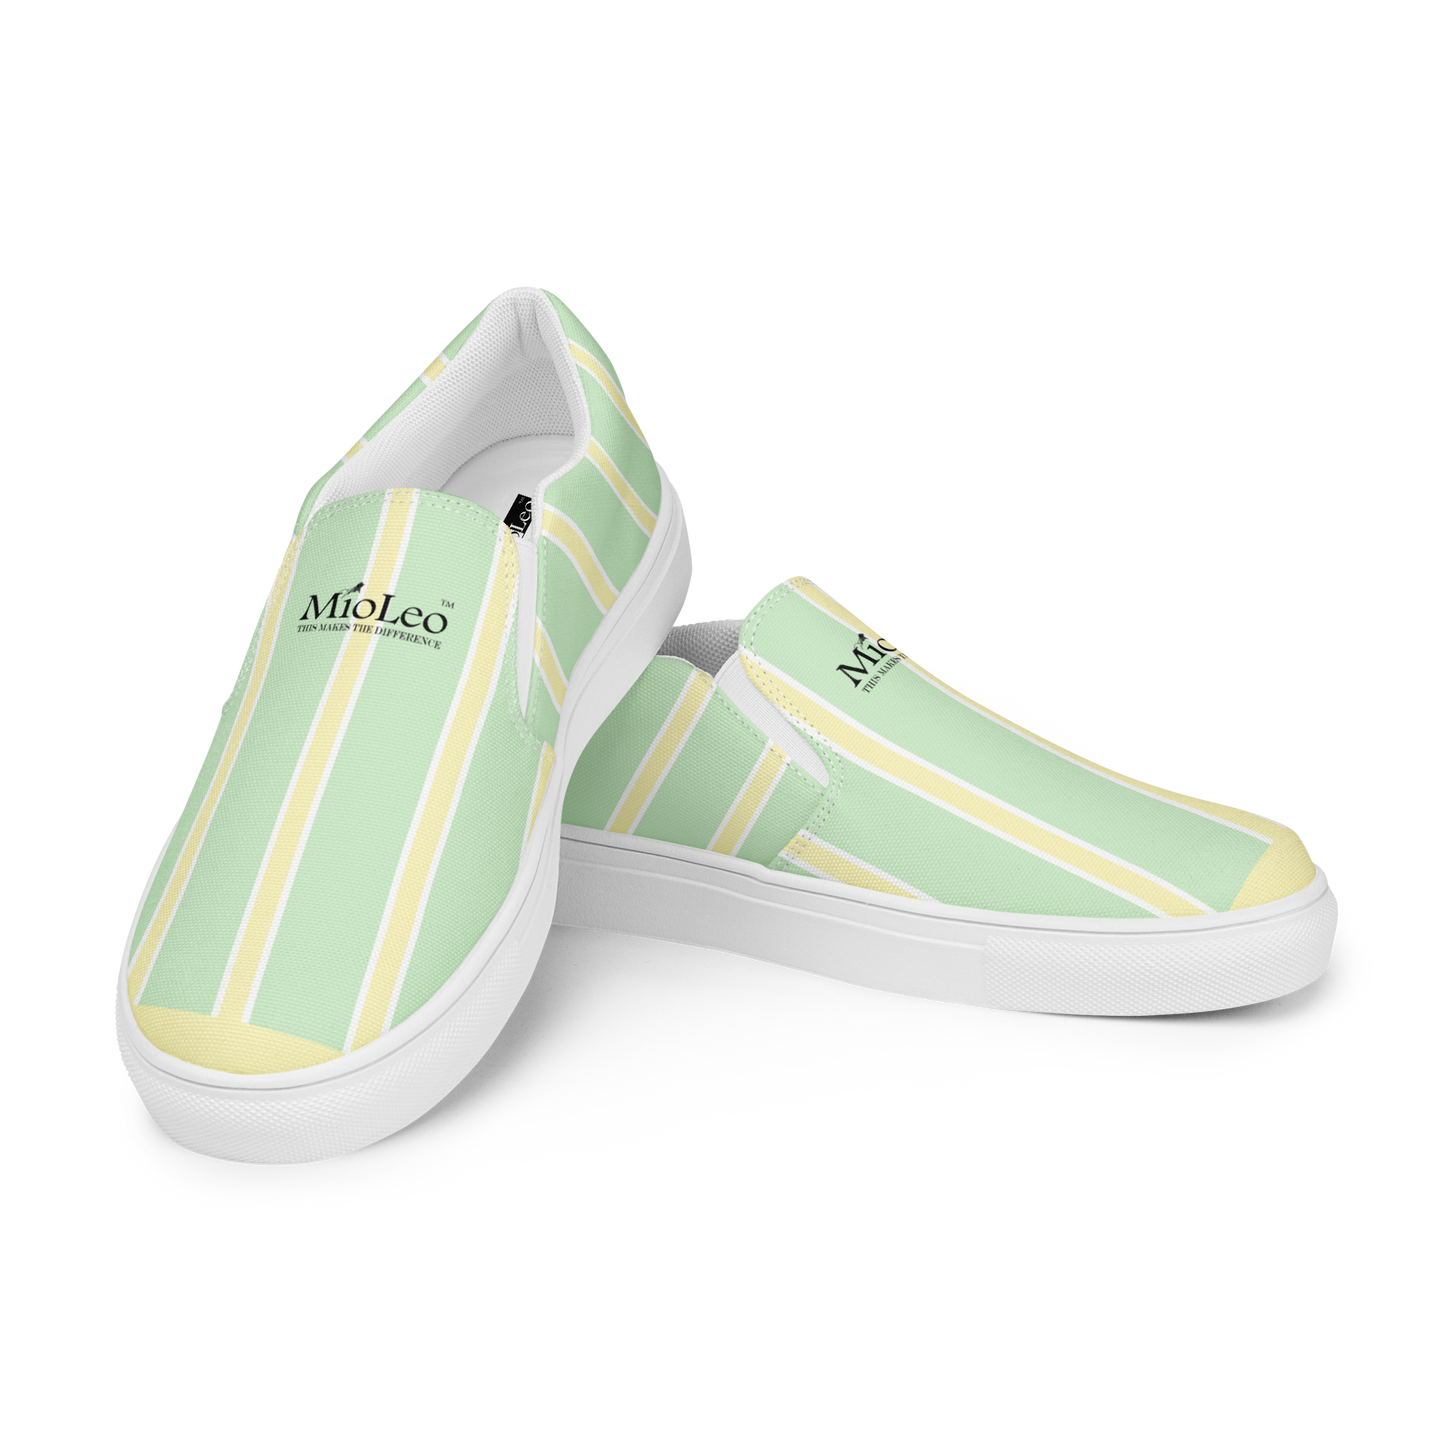 Women’s Slip-On Canvas Shoes White-Line No.870 "1 of 5K" by MioLeo